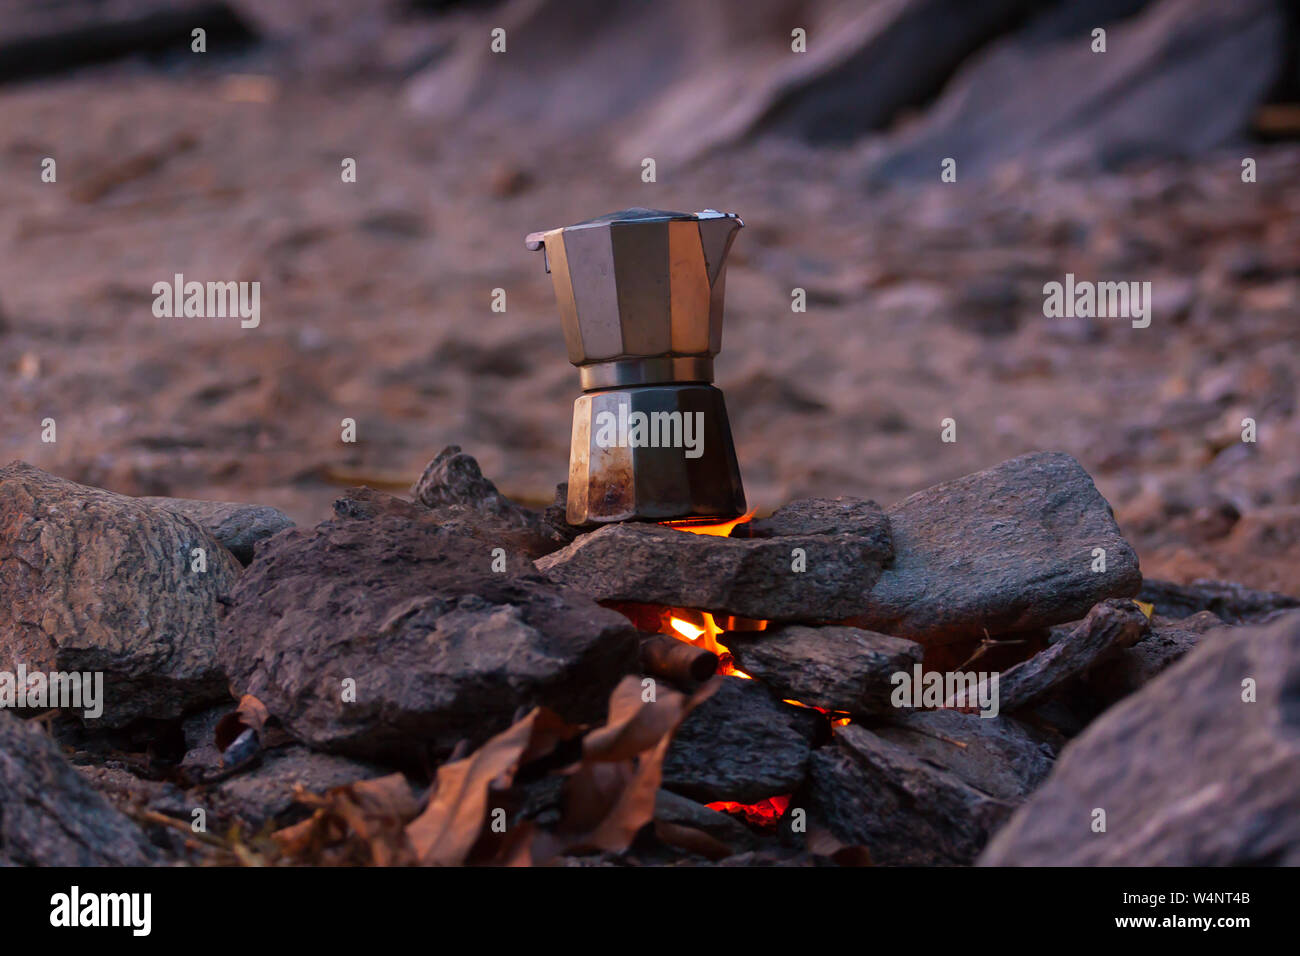 Making a cup of coffee on the beach. Stock Photo